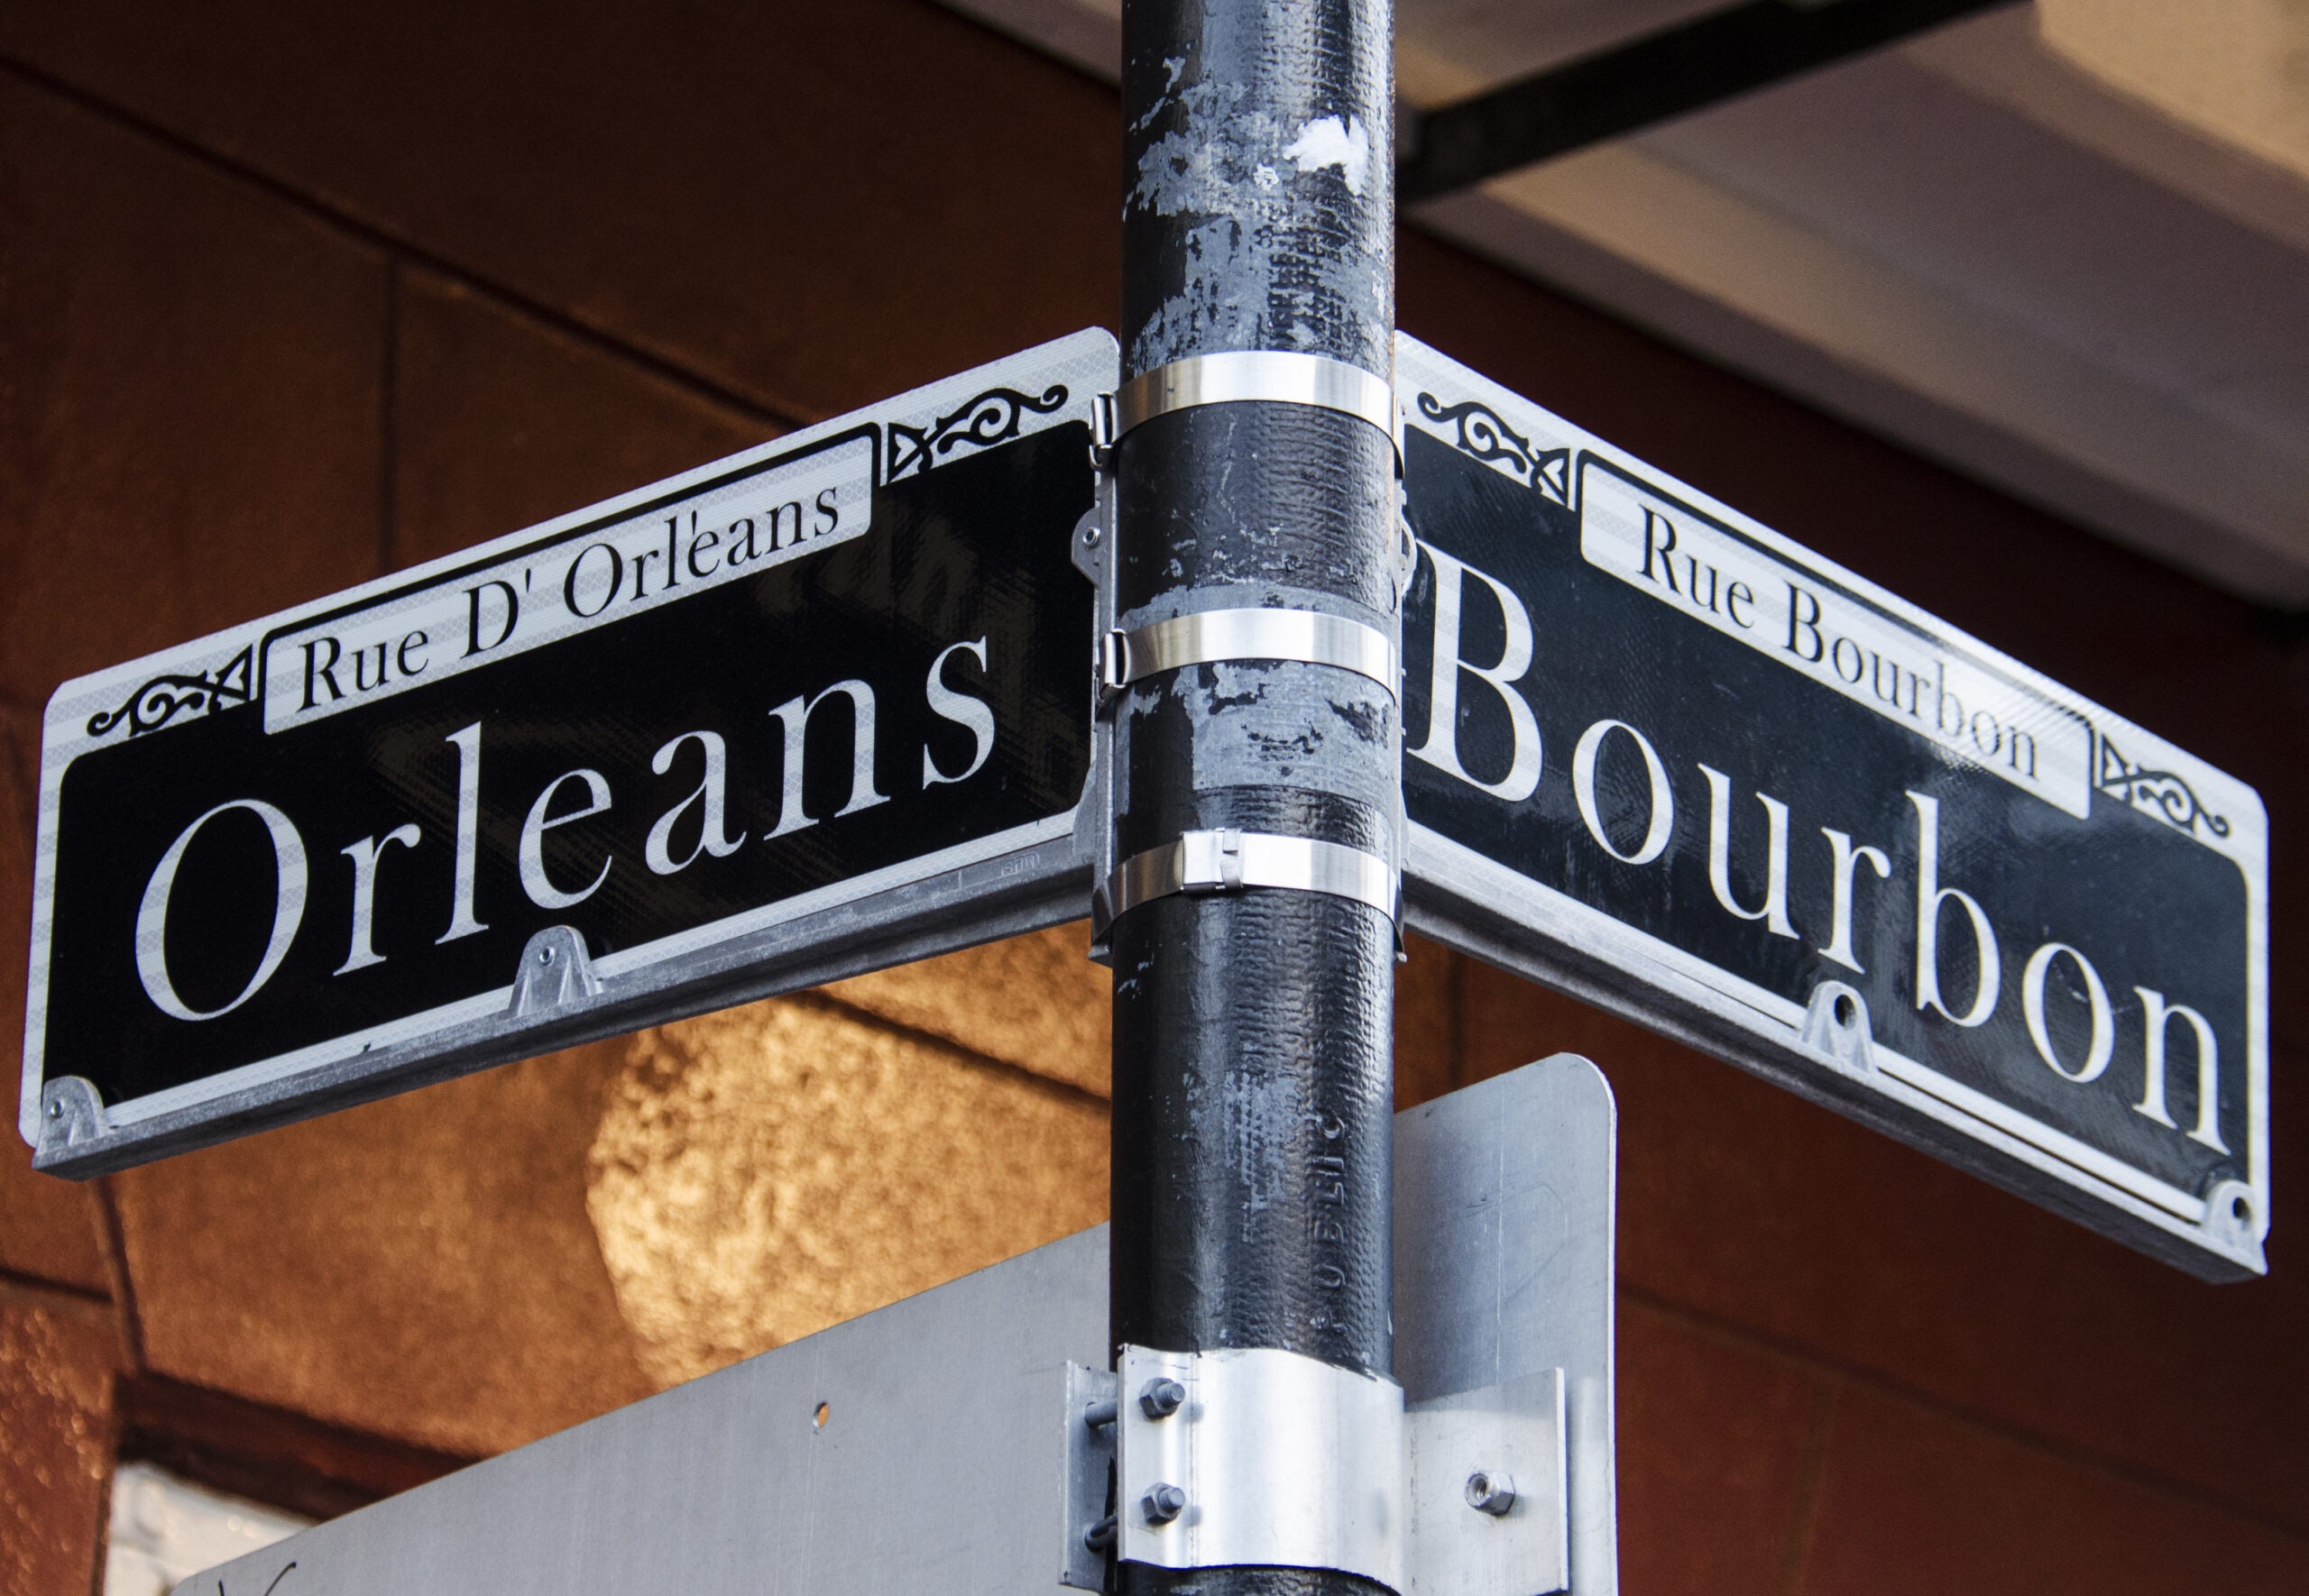 New Orleans City Council Approves Measure To Decriminalize Cannabis Possession &#038; Clears Roughly 10,000 Pending Cannabis Cases